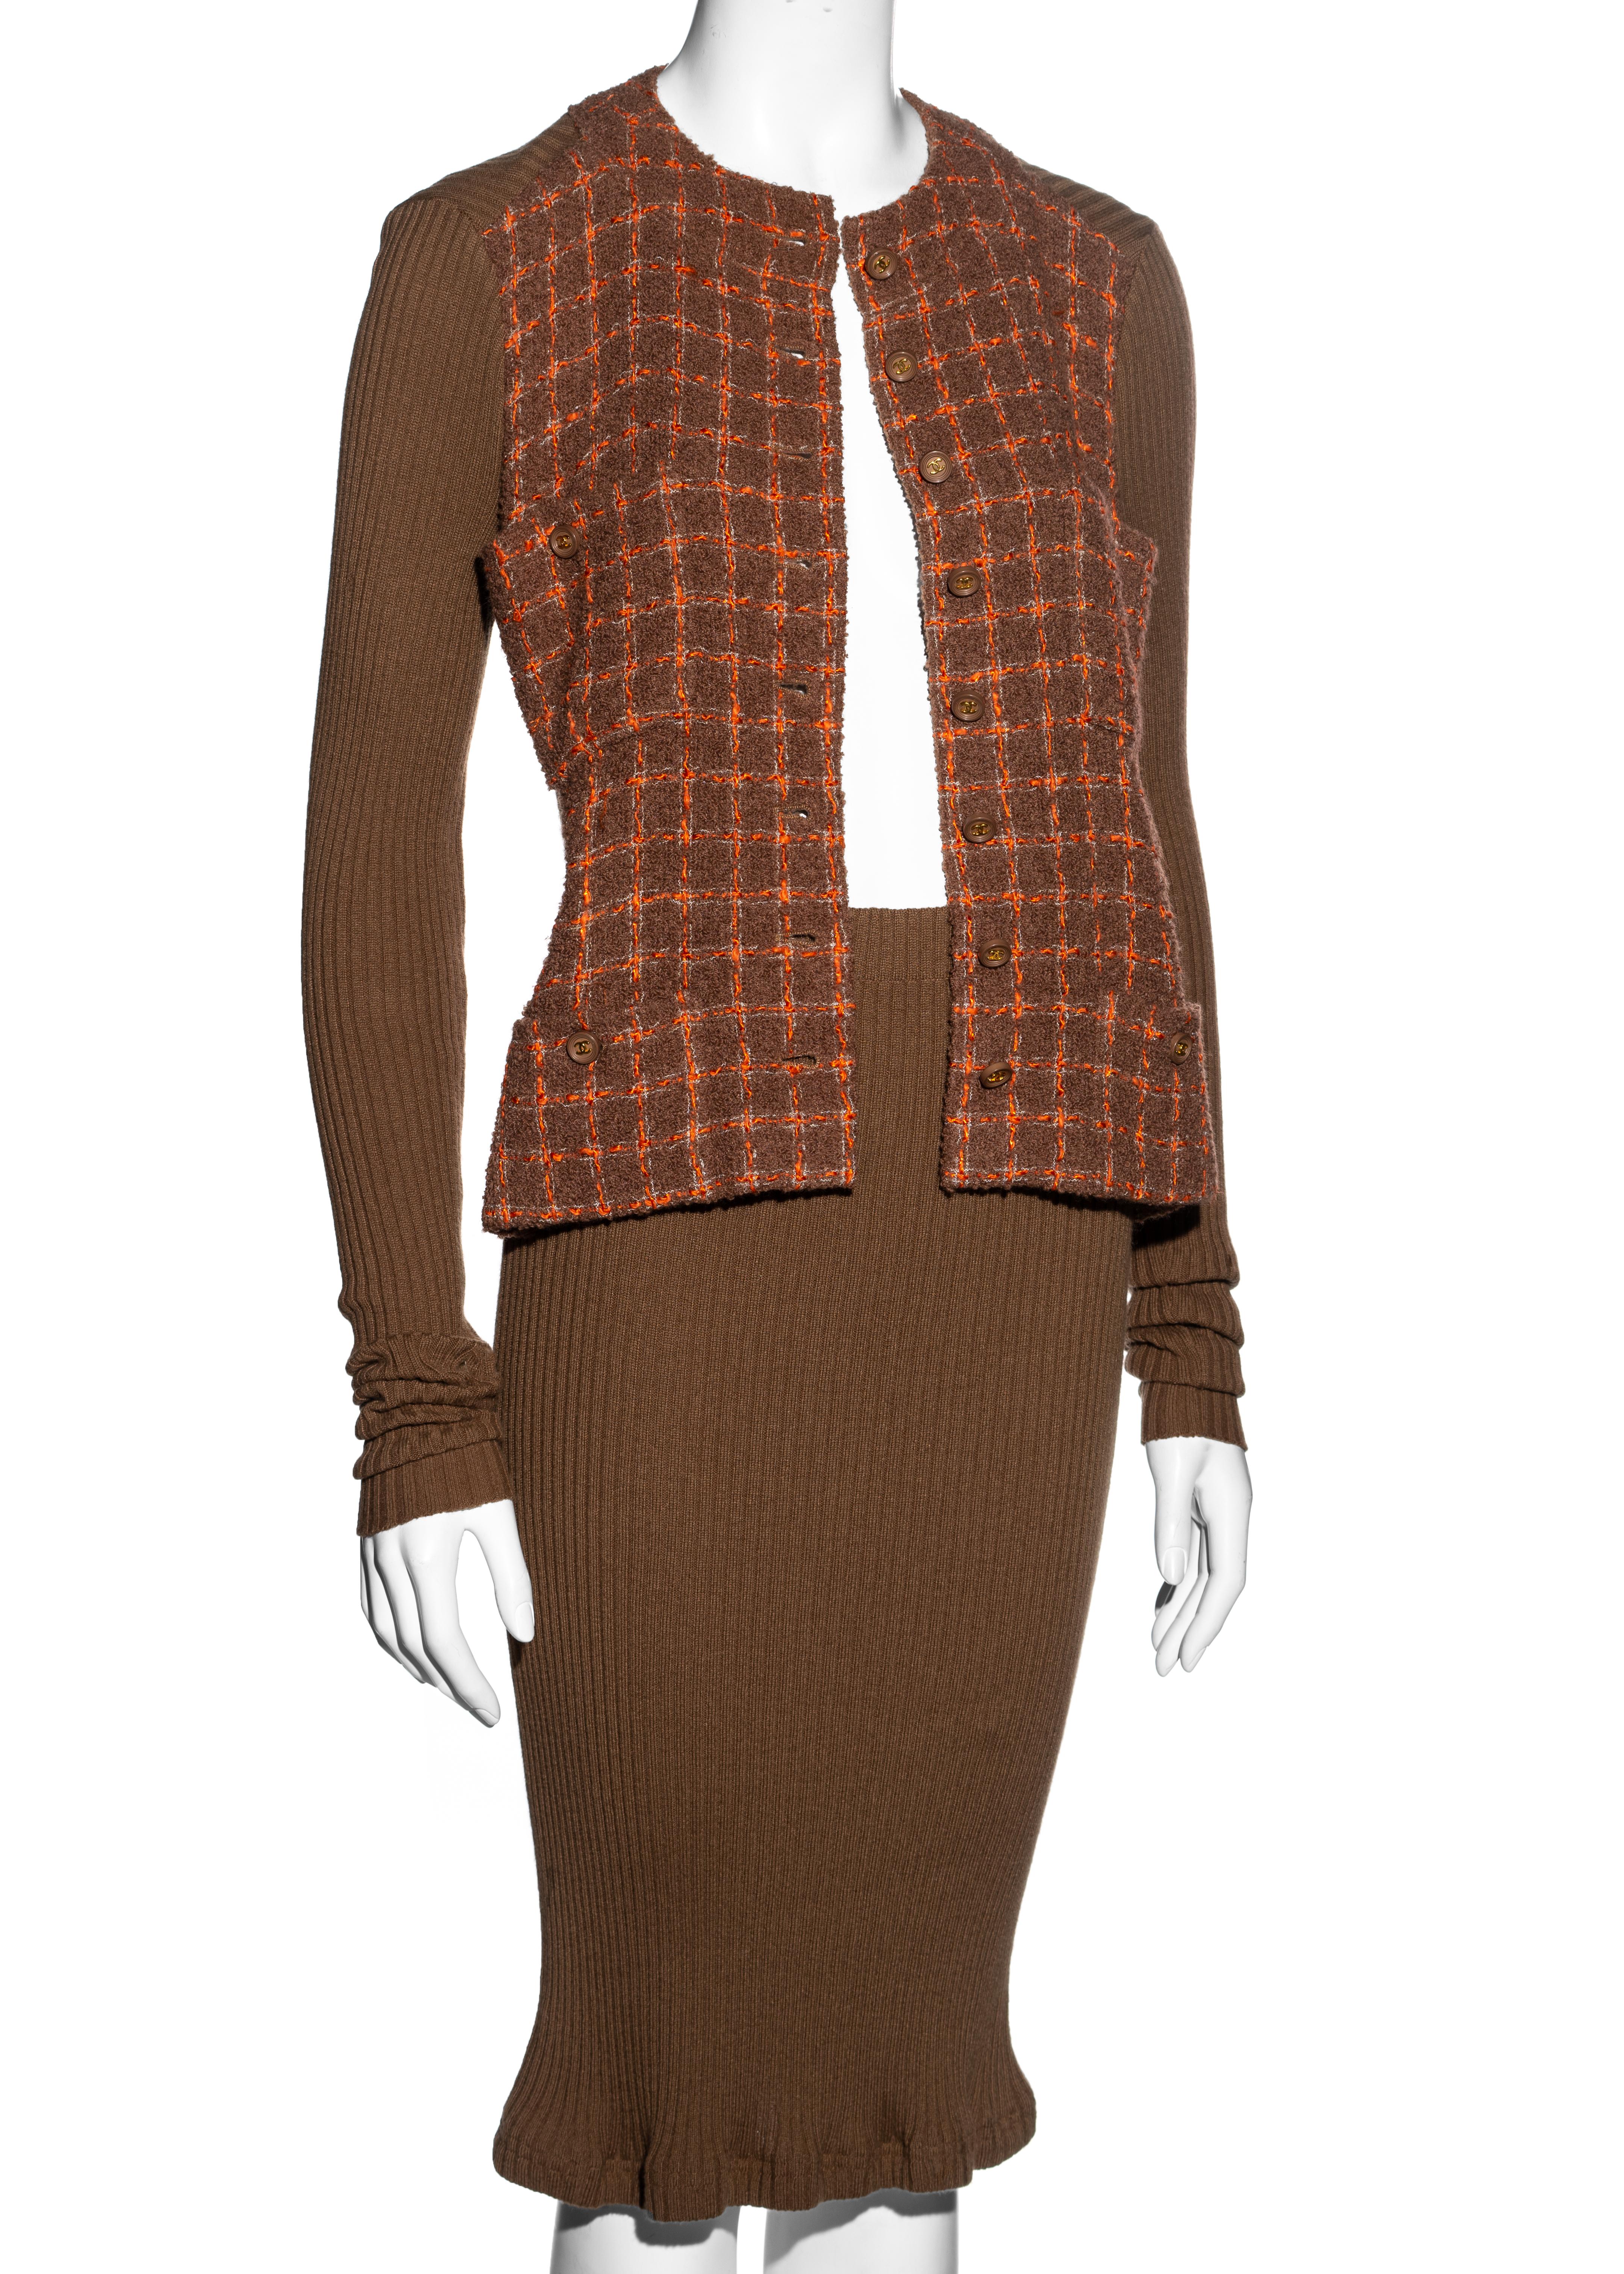 Chanel by Karl Lagerfeld orange and brown knit and tweed jacket dress, fw 1995 For Sale 3